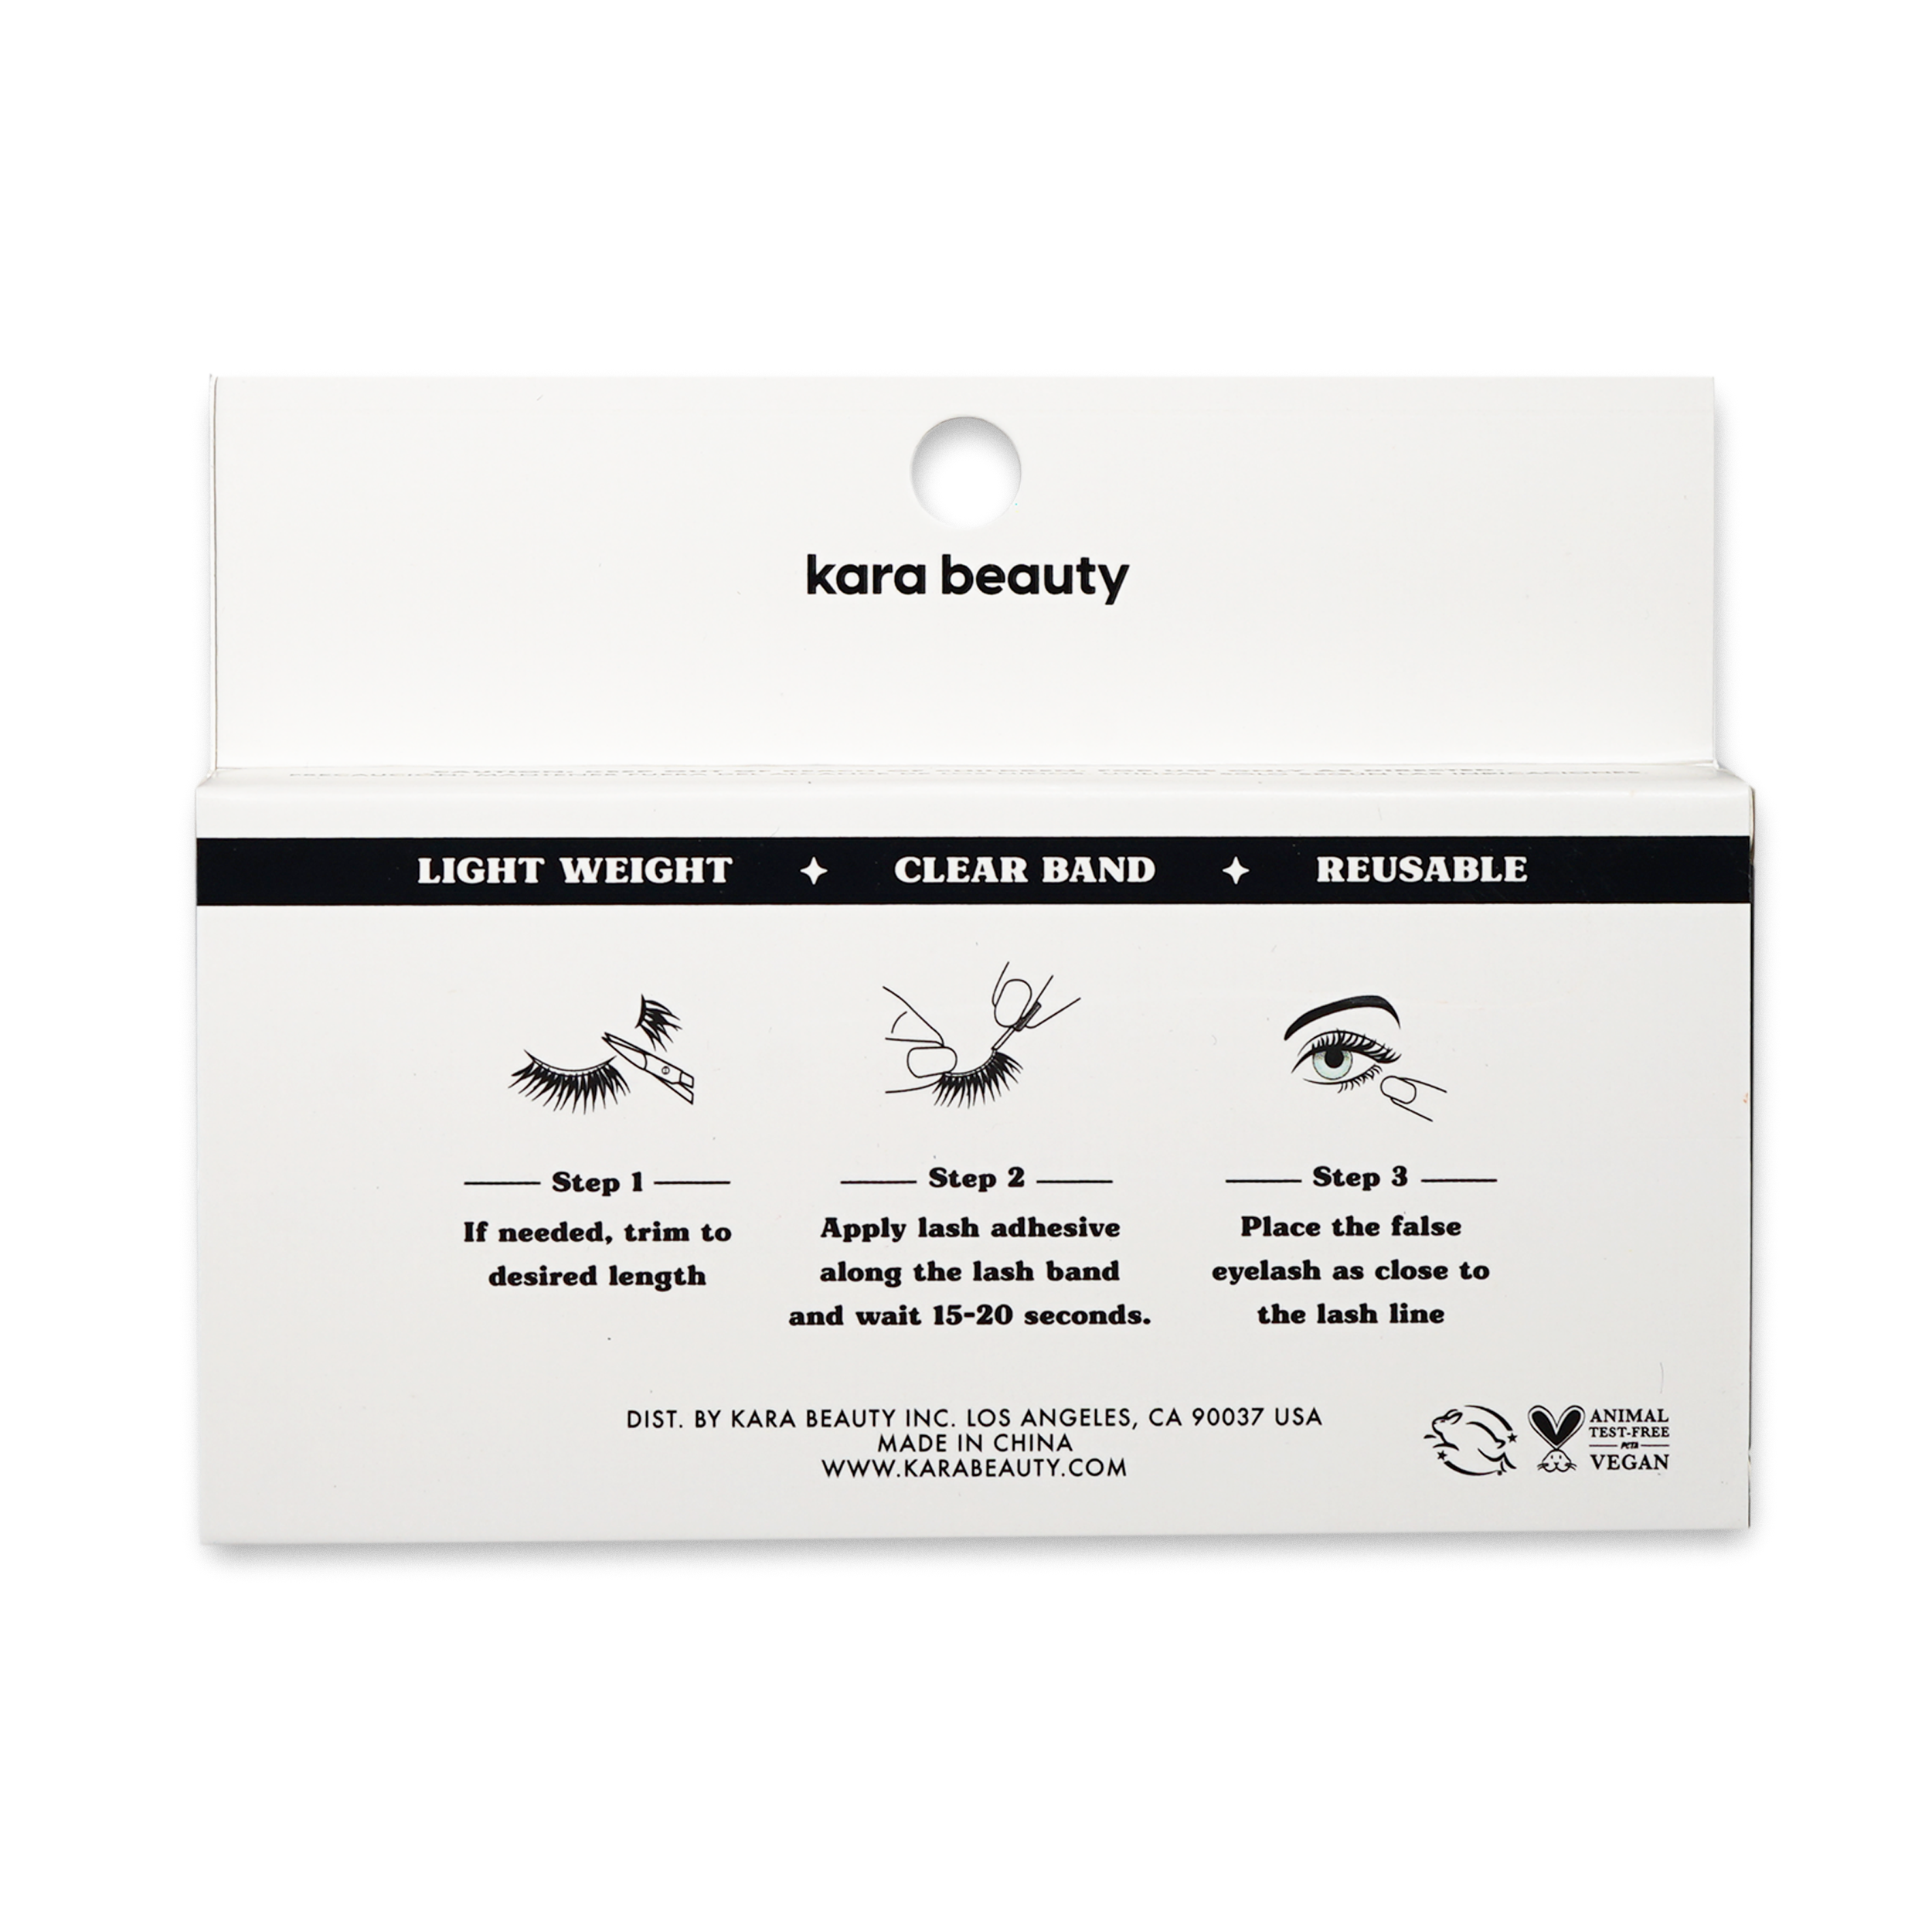 IBL01 GHOSTED Invisible Band Fabulashes 3D Faux Mink Lashes